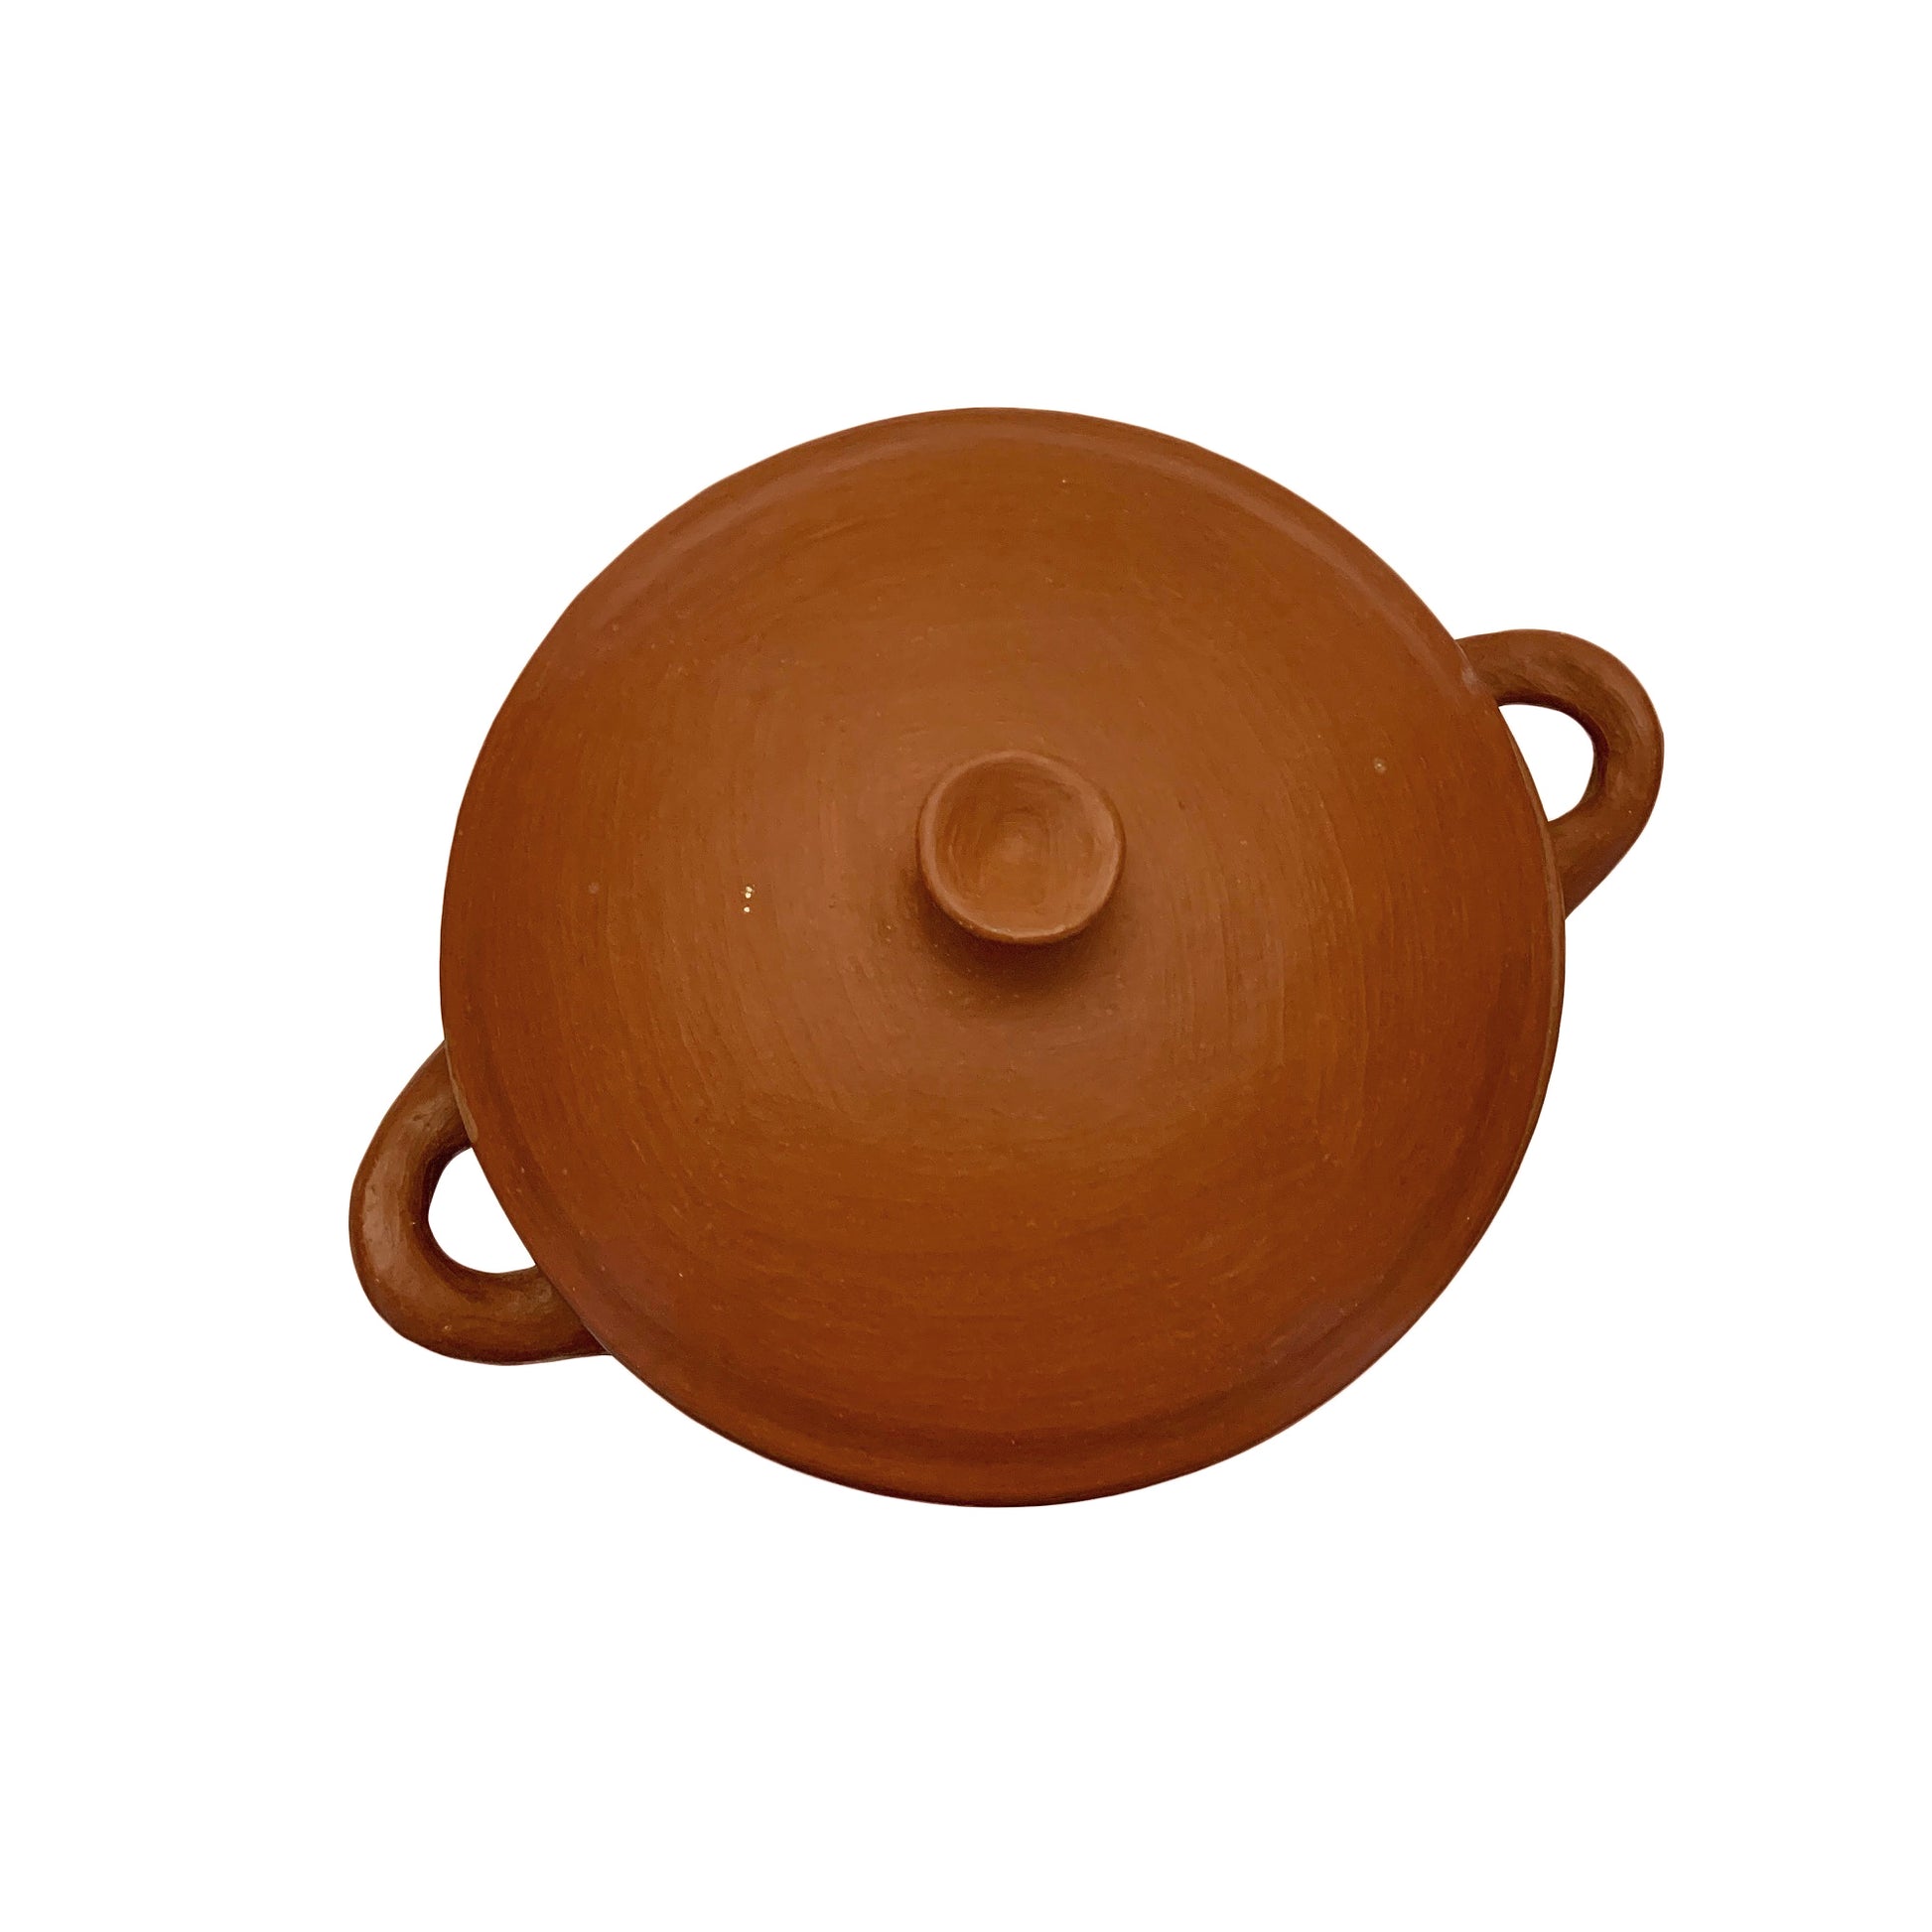 Pottery clay pot for cooking. Handmade. Red clay casserole 304.32